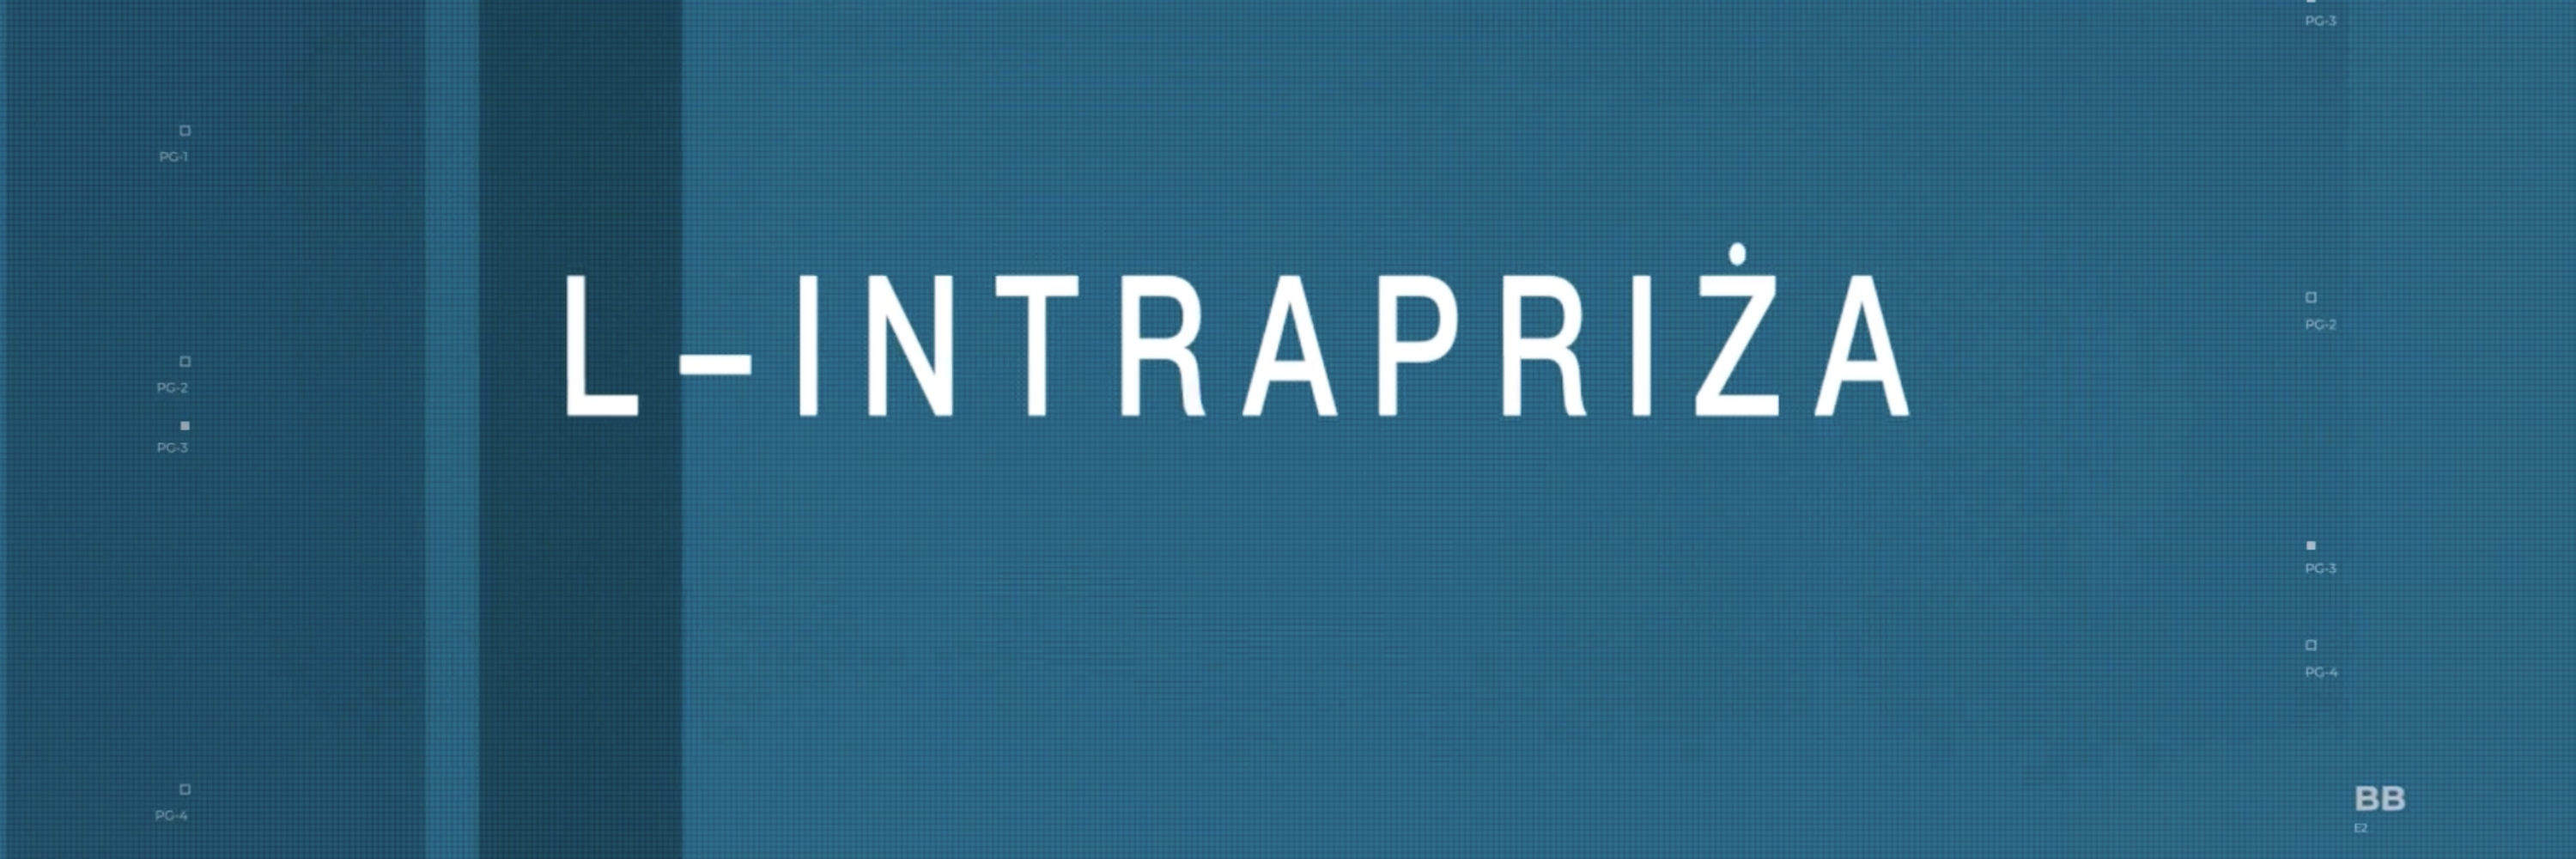 L-Intrapriża logo - a new series on TVM News+ commissioned to motion blur